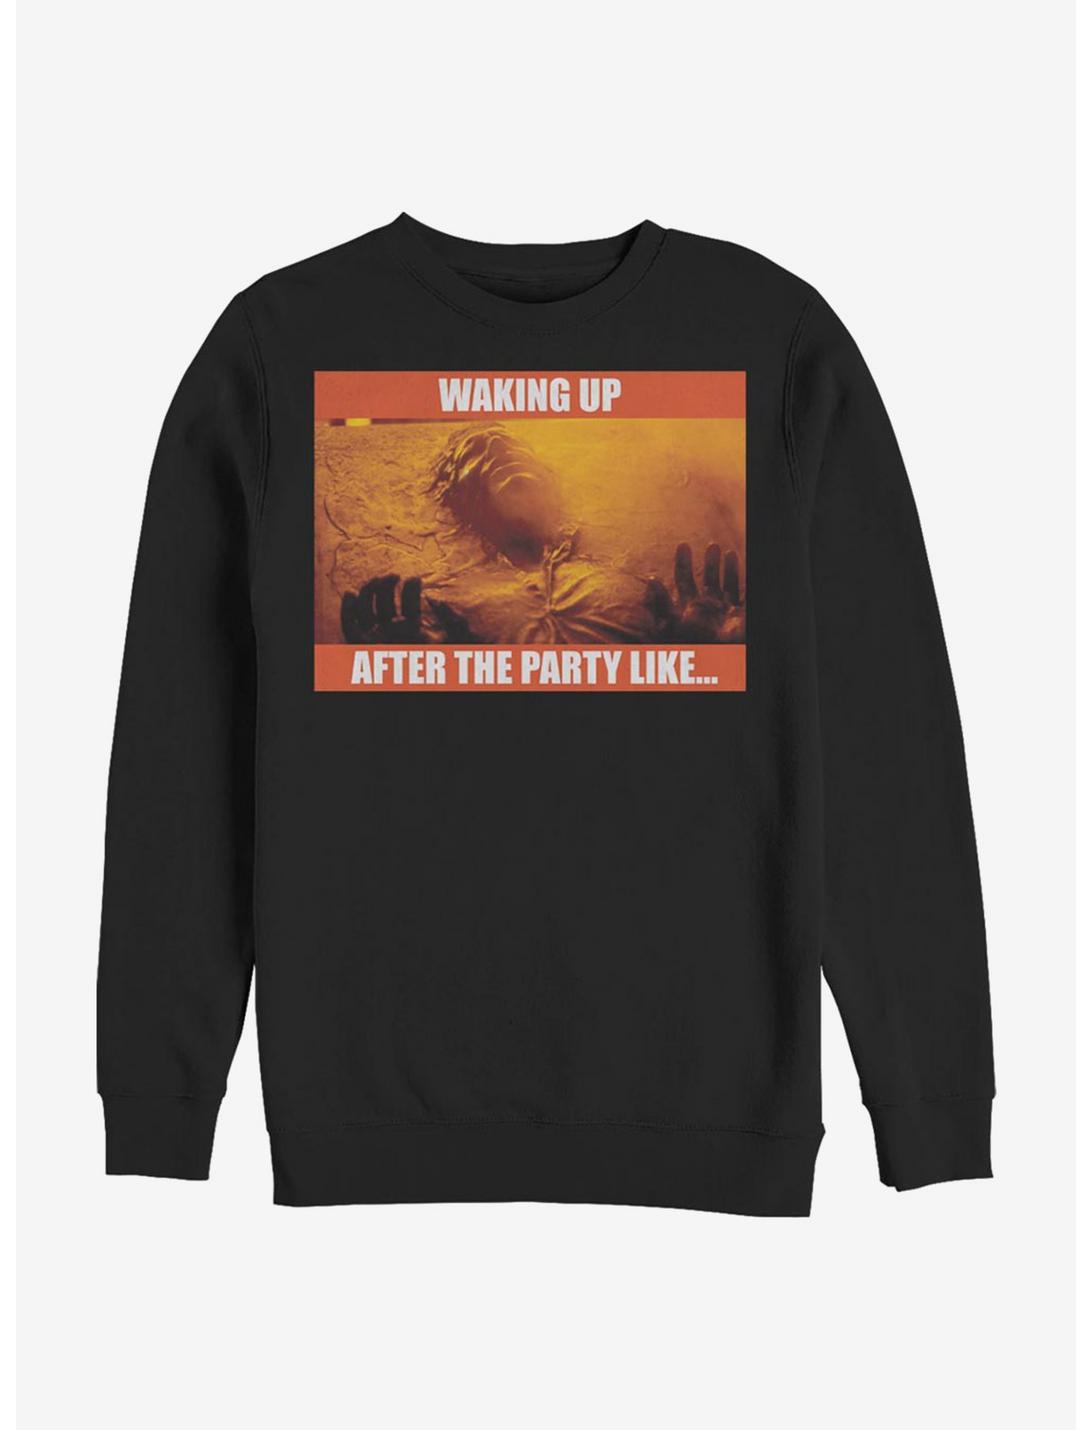 Star Wars Waking Up After The Party Sweatshirt, BLACK, hi-res